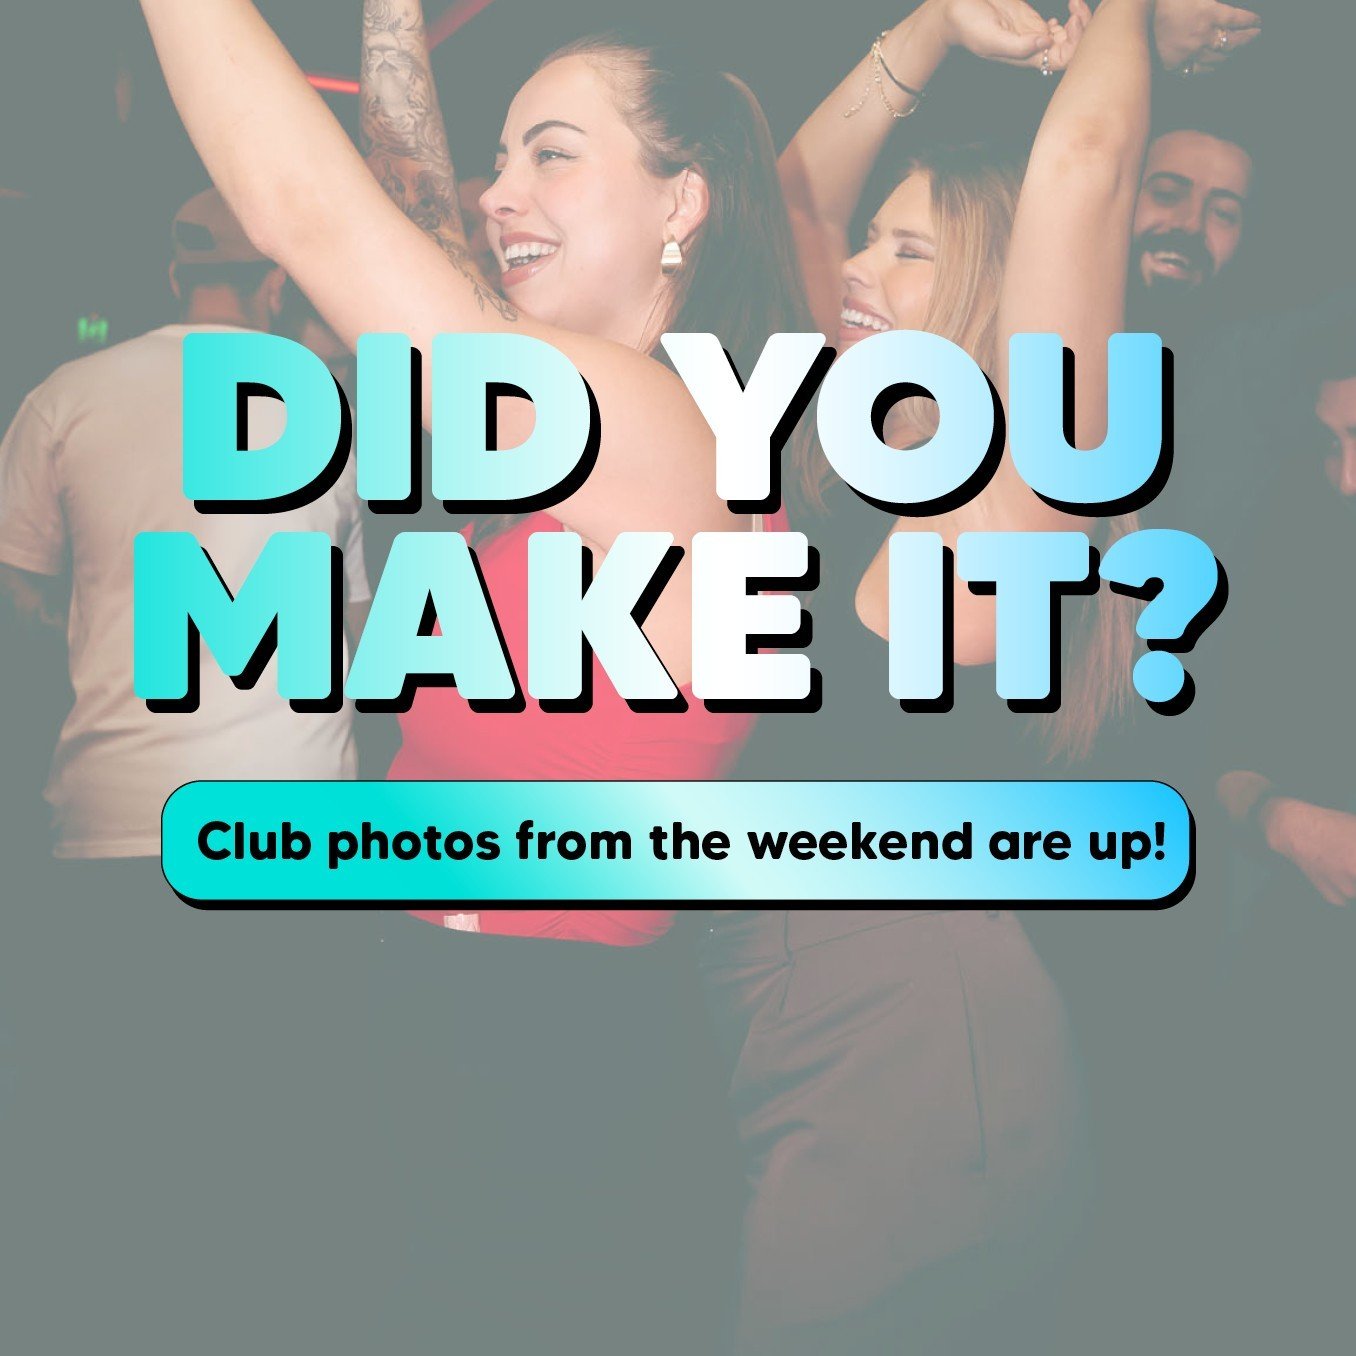 📸⚡️ Club photos from the weekend are online!⁠
⁠
Did you make it?⁠
⁠
View them on our website (via the link in our bio)⁠
⁠
Photos by @pravat.shuttermadness⁠
⁠
#didyoumakeit #carltonsaturdays #bringthebeats #happyhour #weekendparty #melbournenightlife